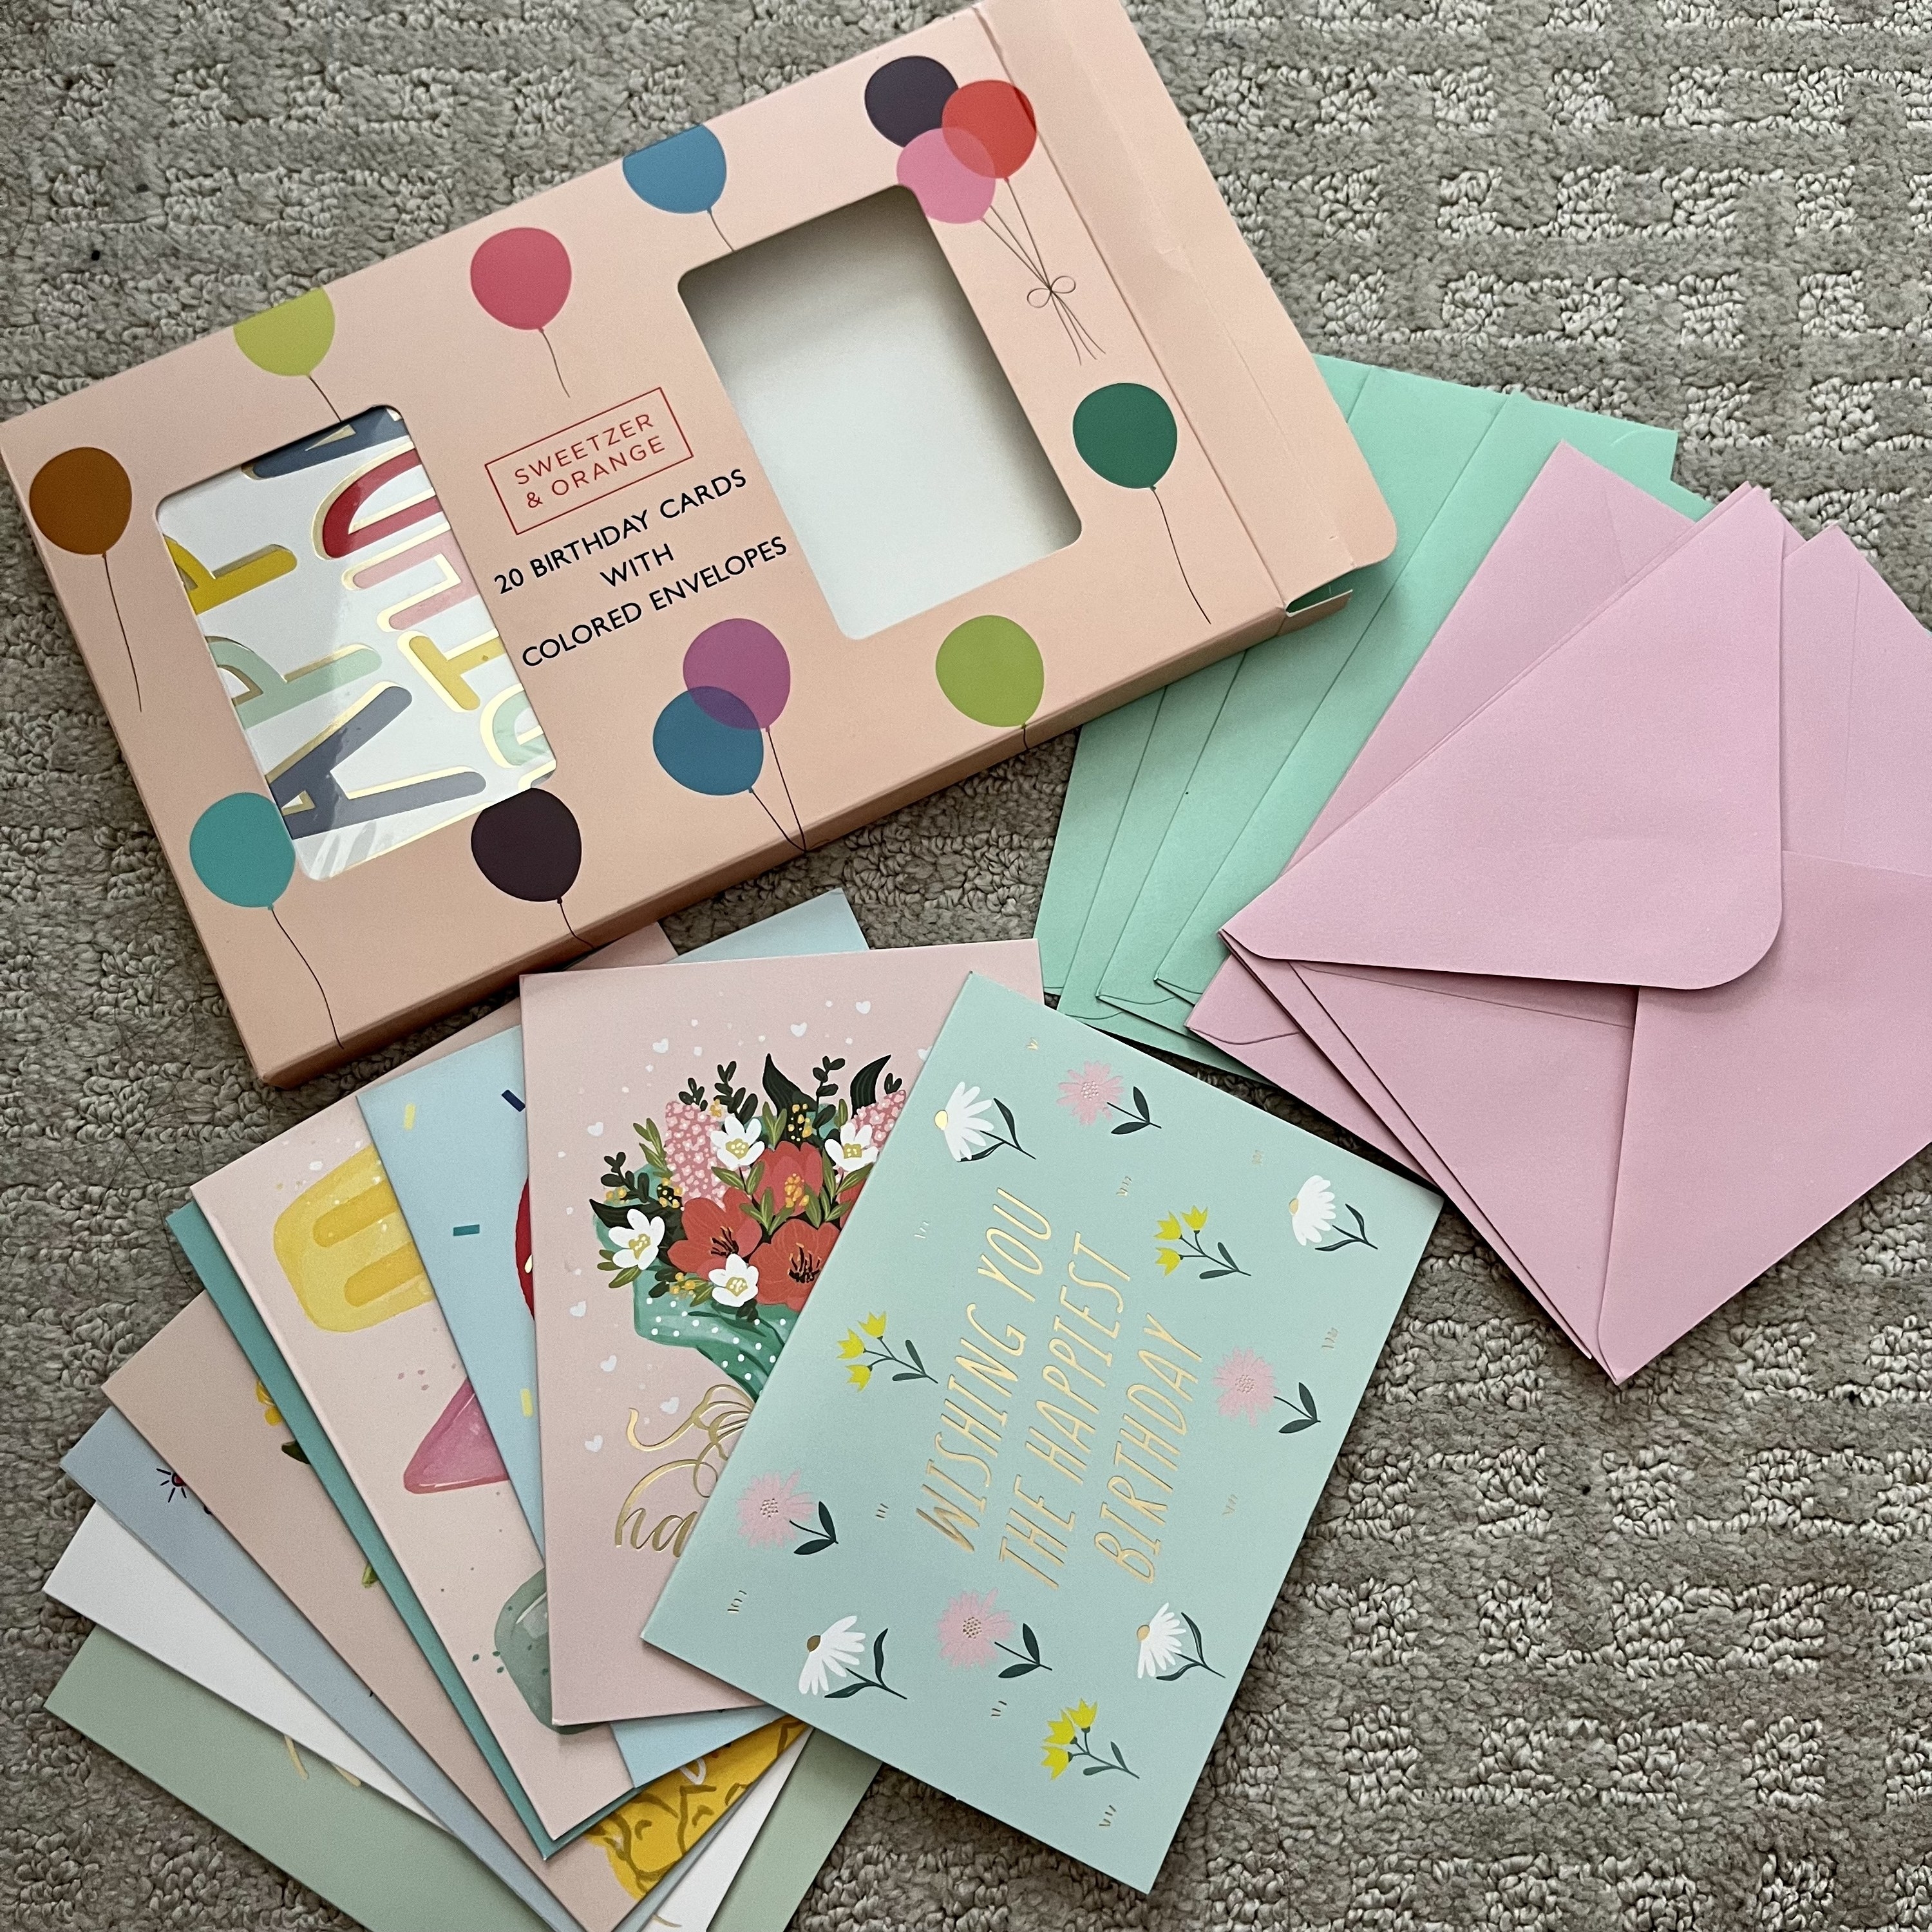 The birthday cards and envelopes spread out on a carpet